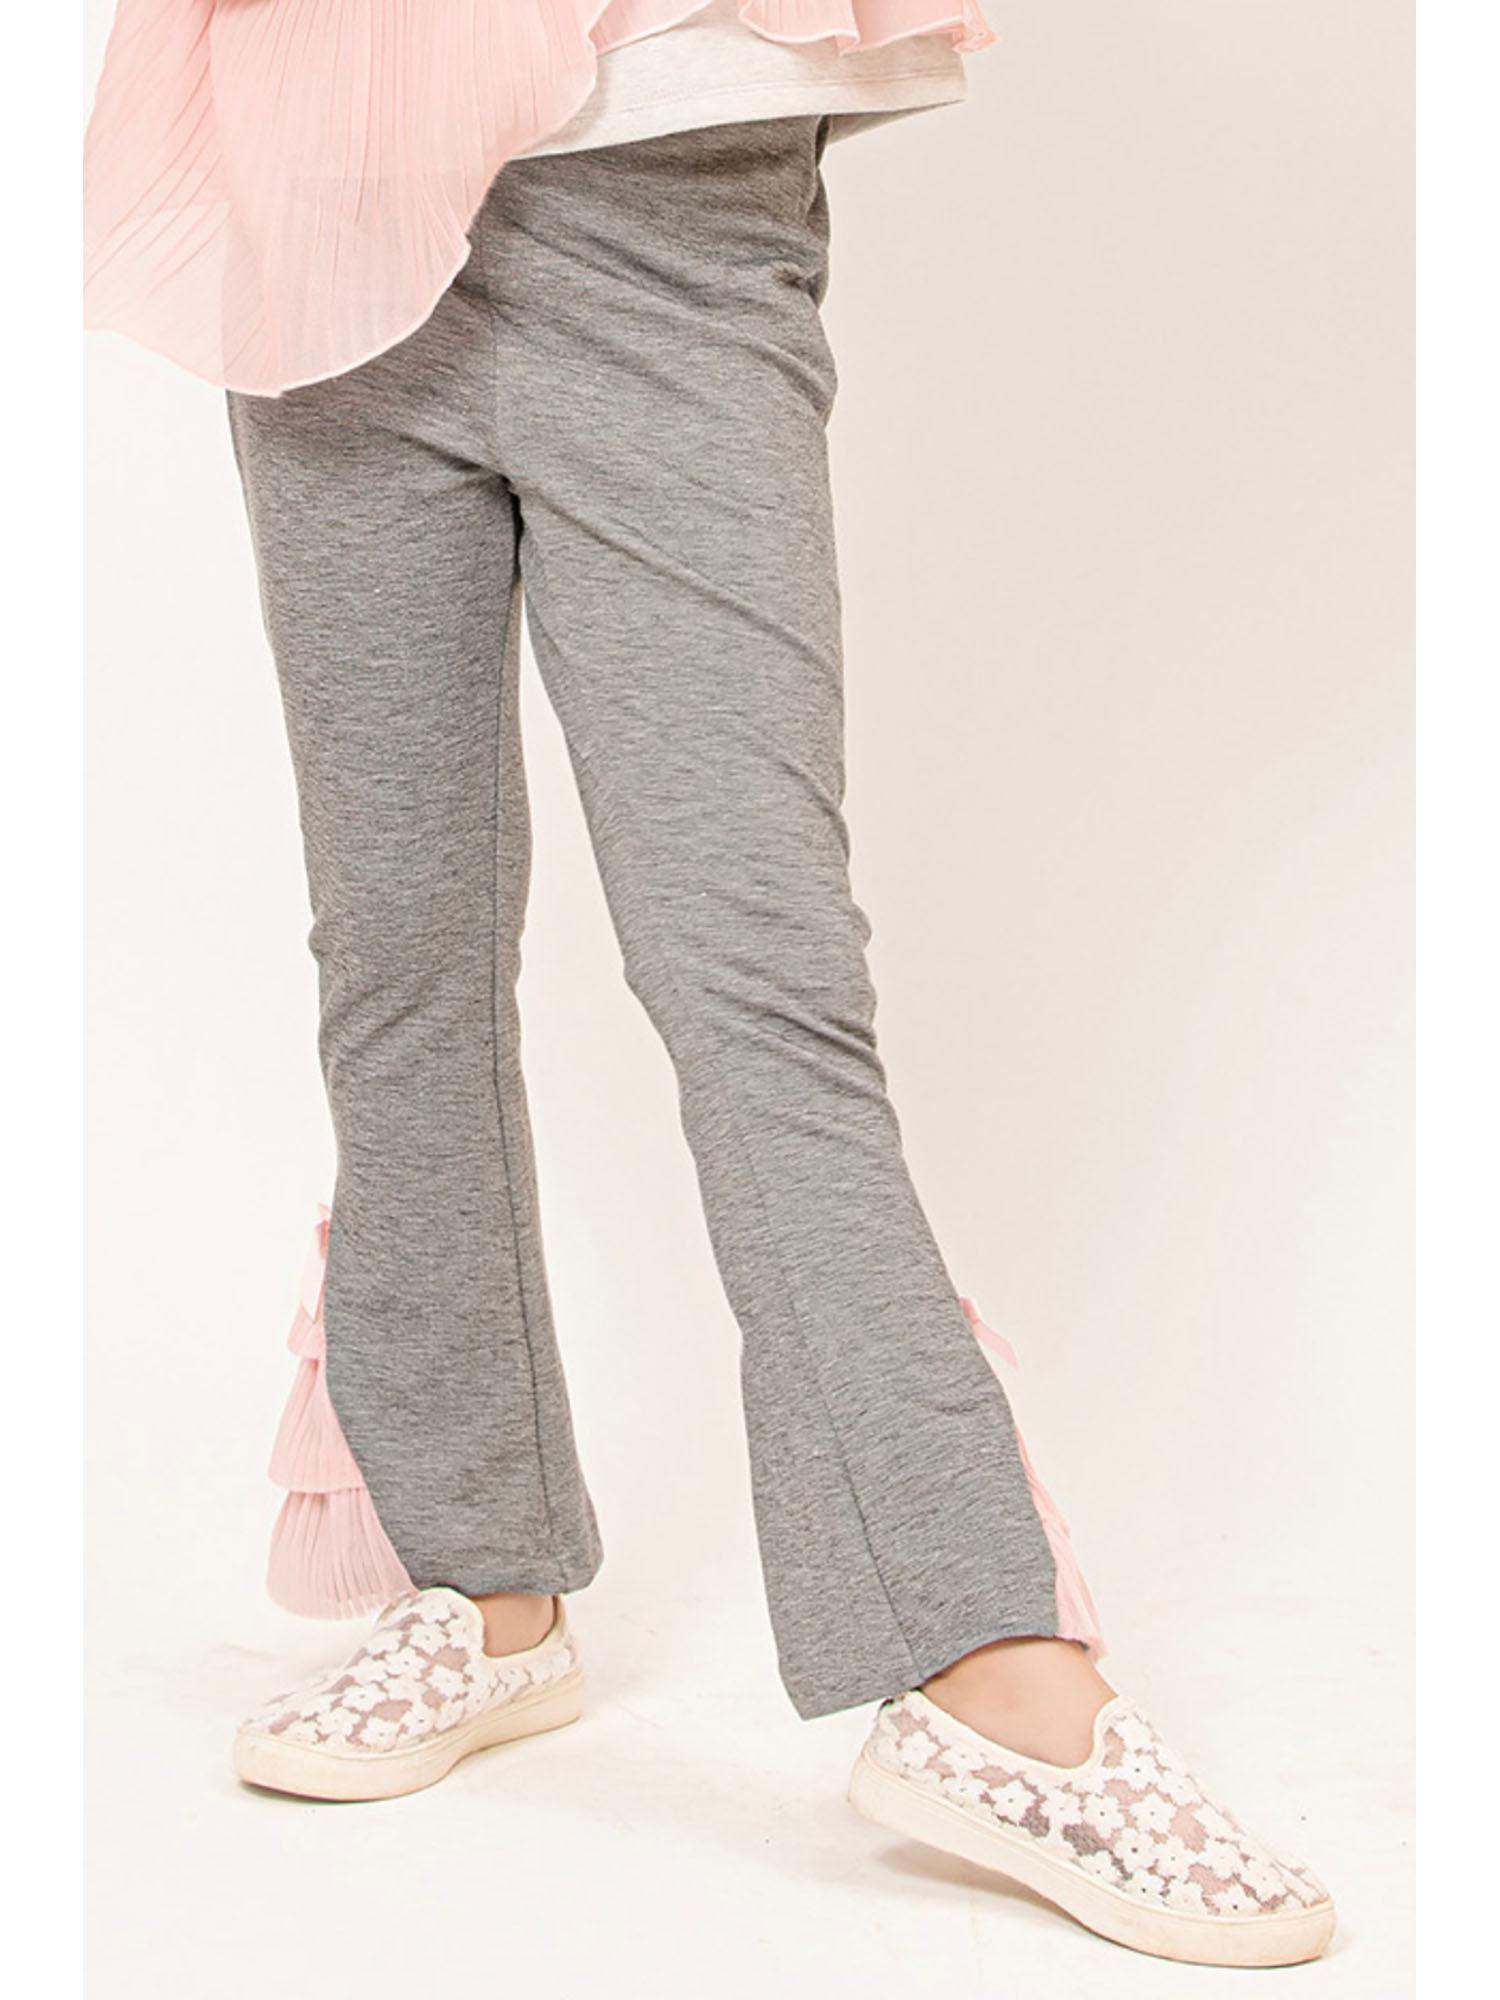 varsity-chic-grey-bell-bottoms-with-baby-pink-frills